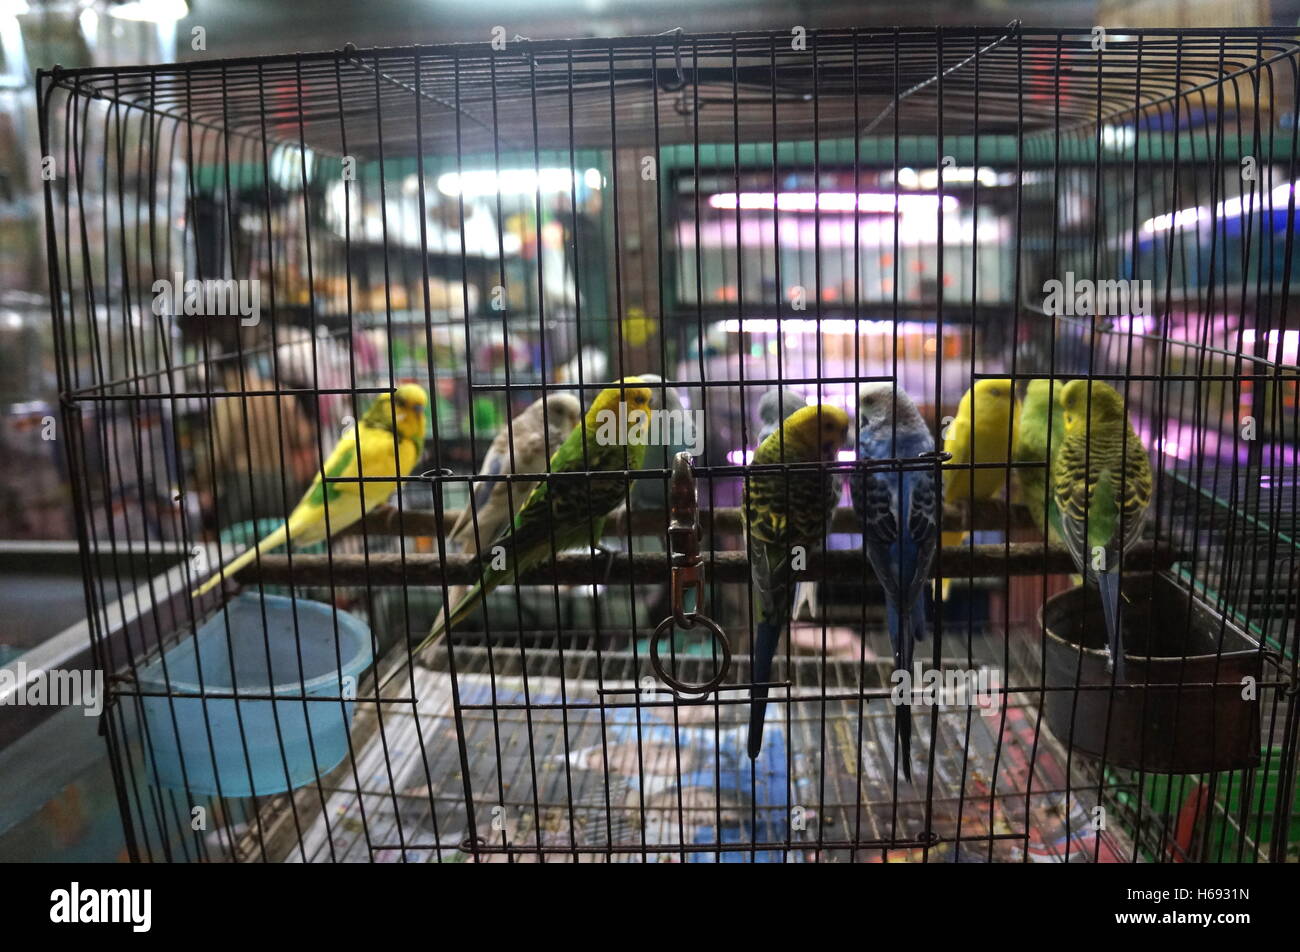 Budgerigars Cage High Resolution Stock Photography and Images - Alamy